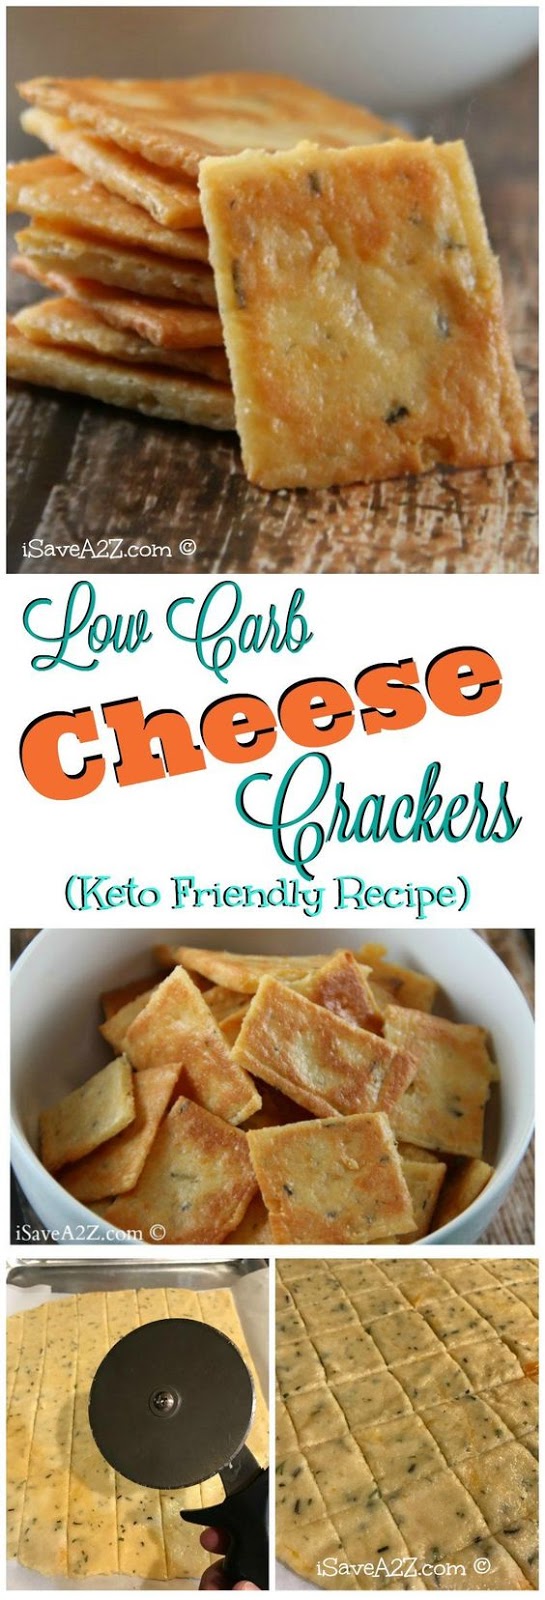 Serve up these low carb cheese crackers that are keto friendly. EASY and delicious, keto cheese crackers to satisfy your cravings. #keto #recipe #baking #healthy #simple #parchmentpaper #appetizerrecipes